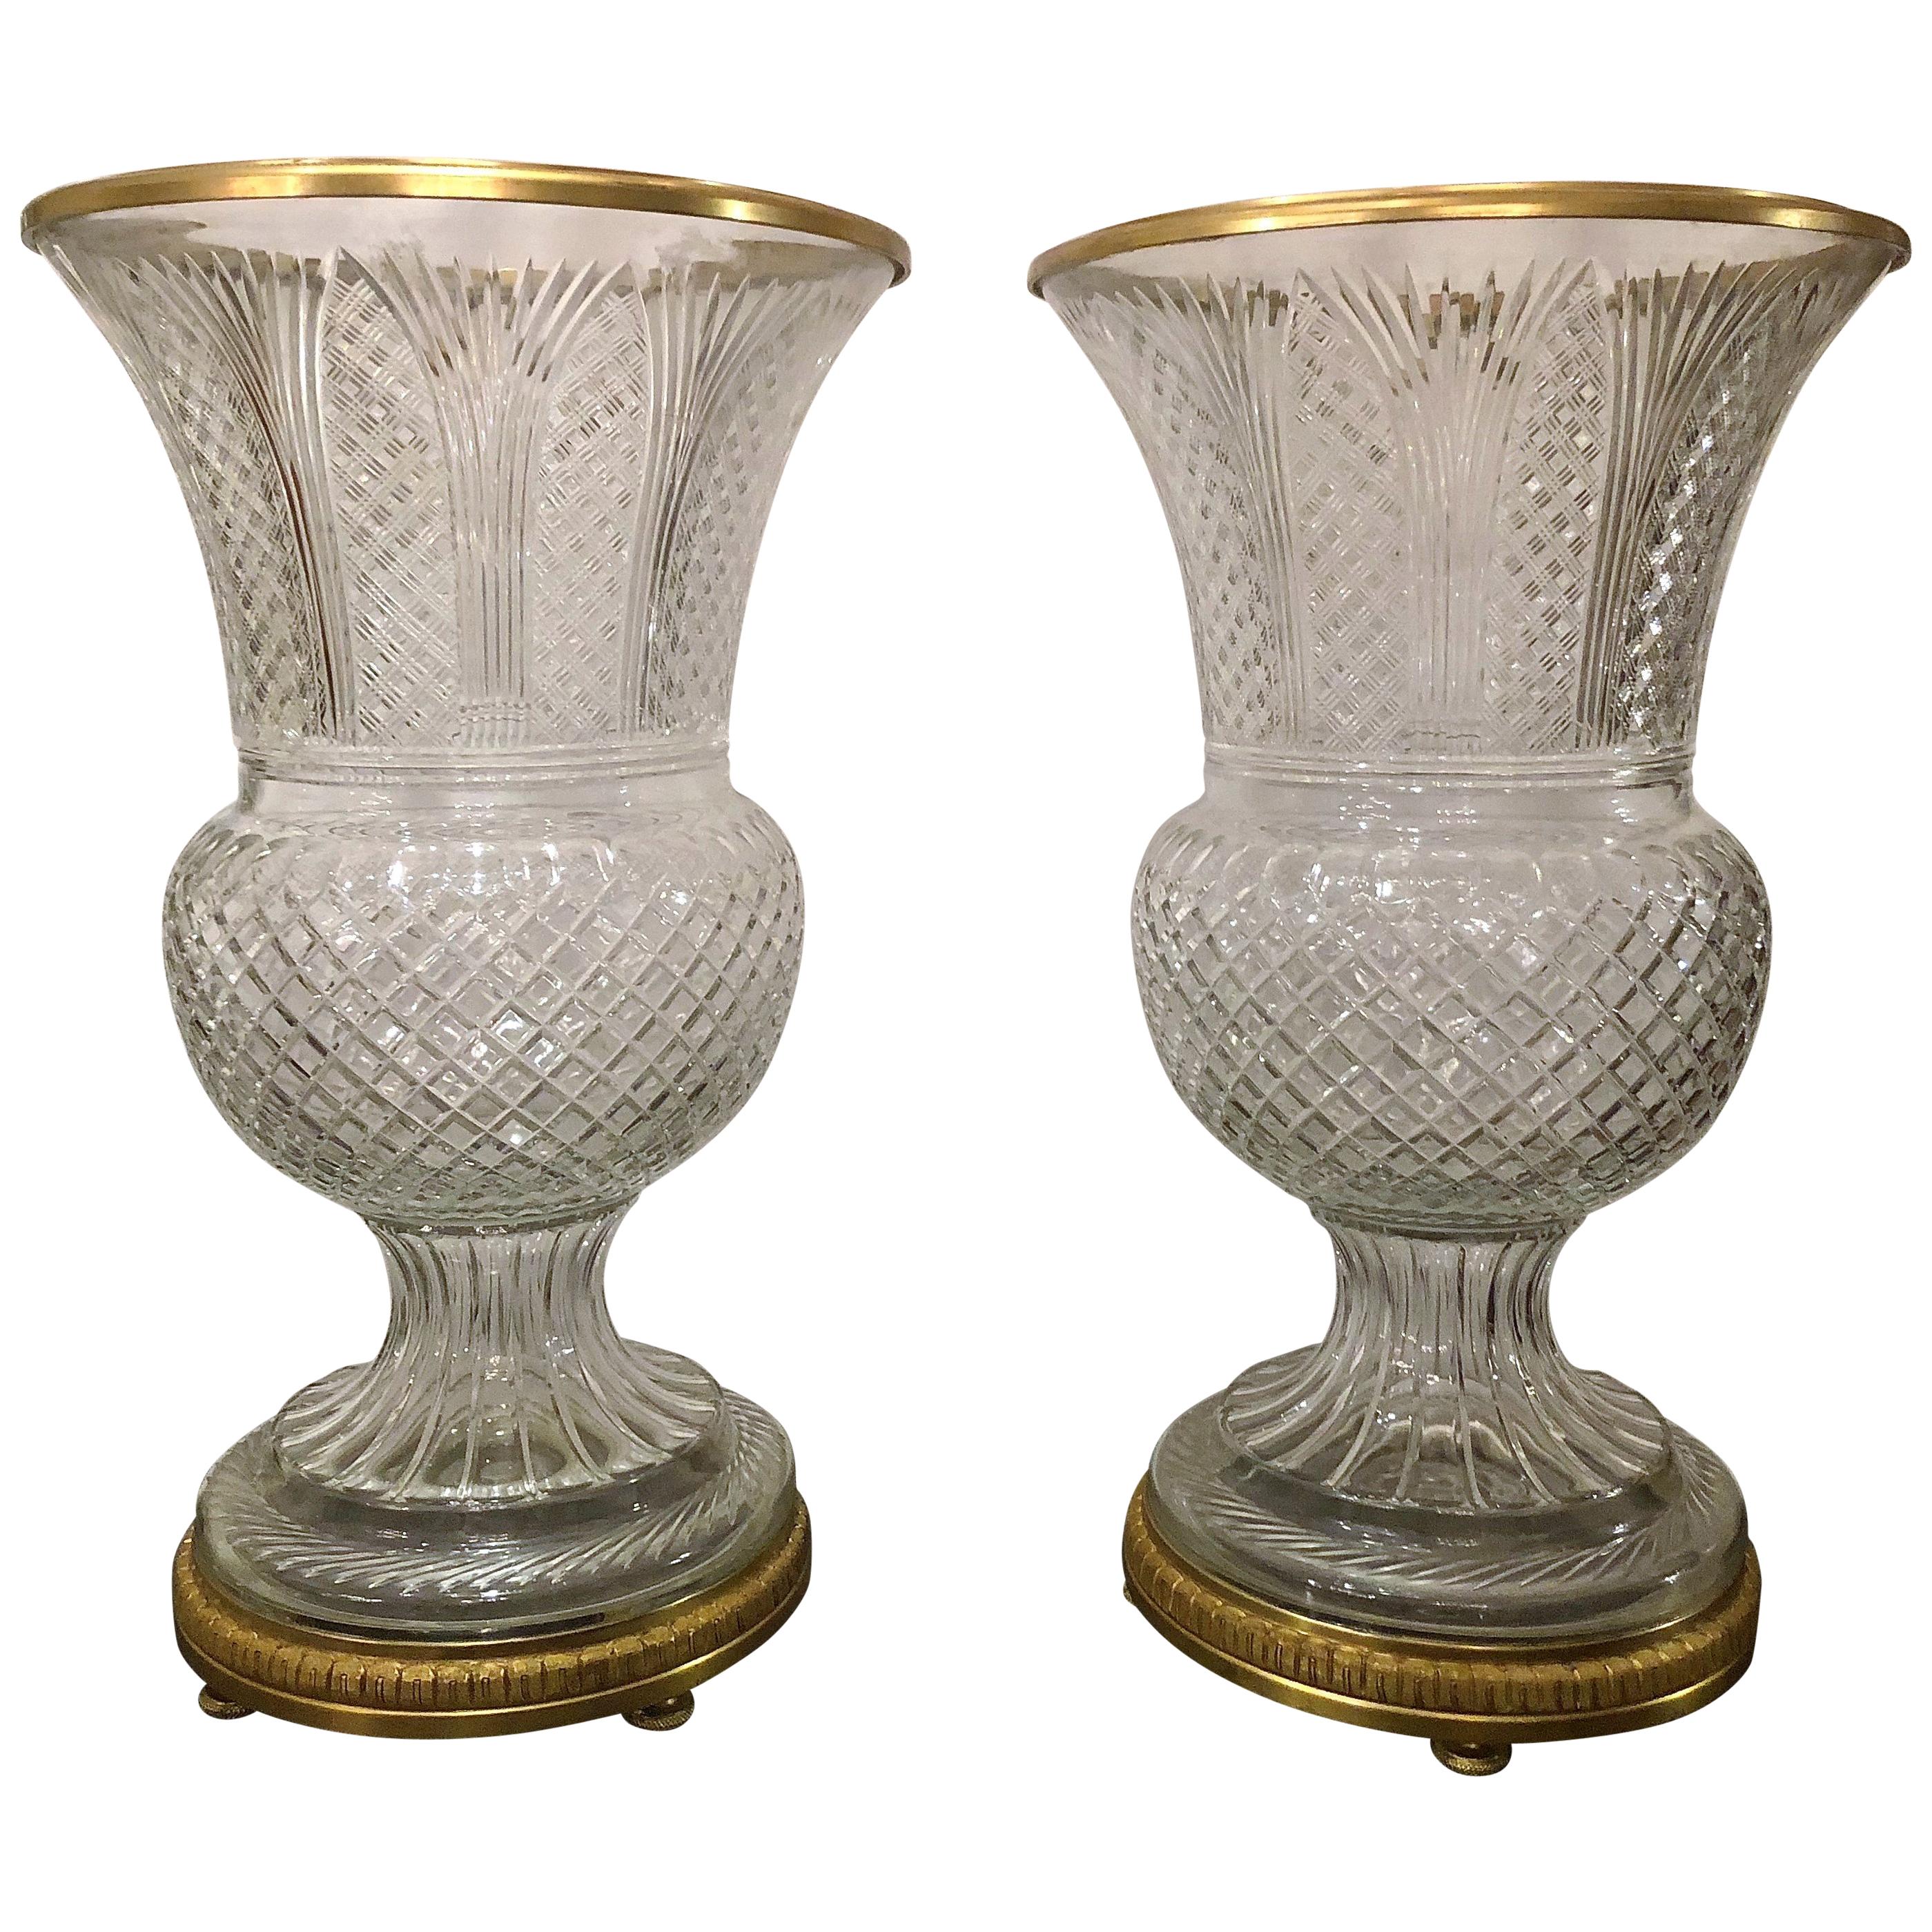 Pair of Estate French Grand Size Cut Crystal Bronze D'Ore Urns